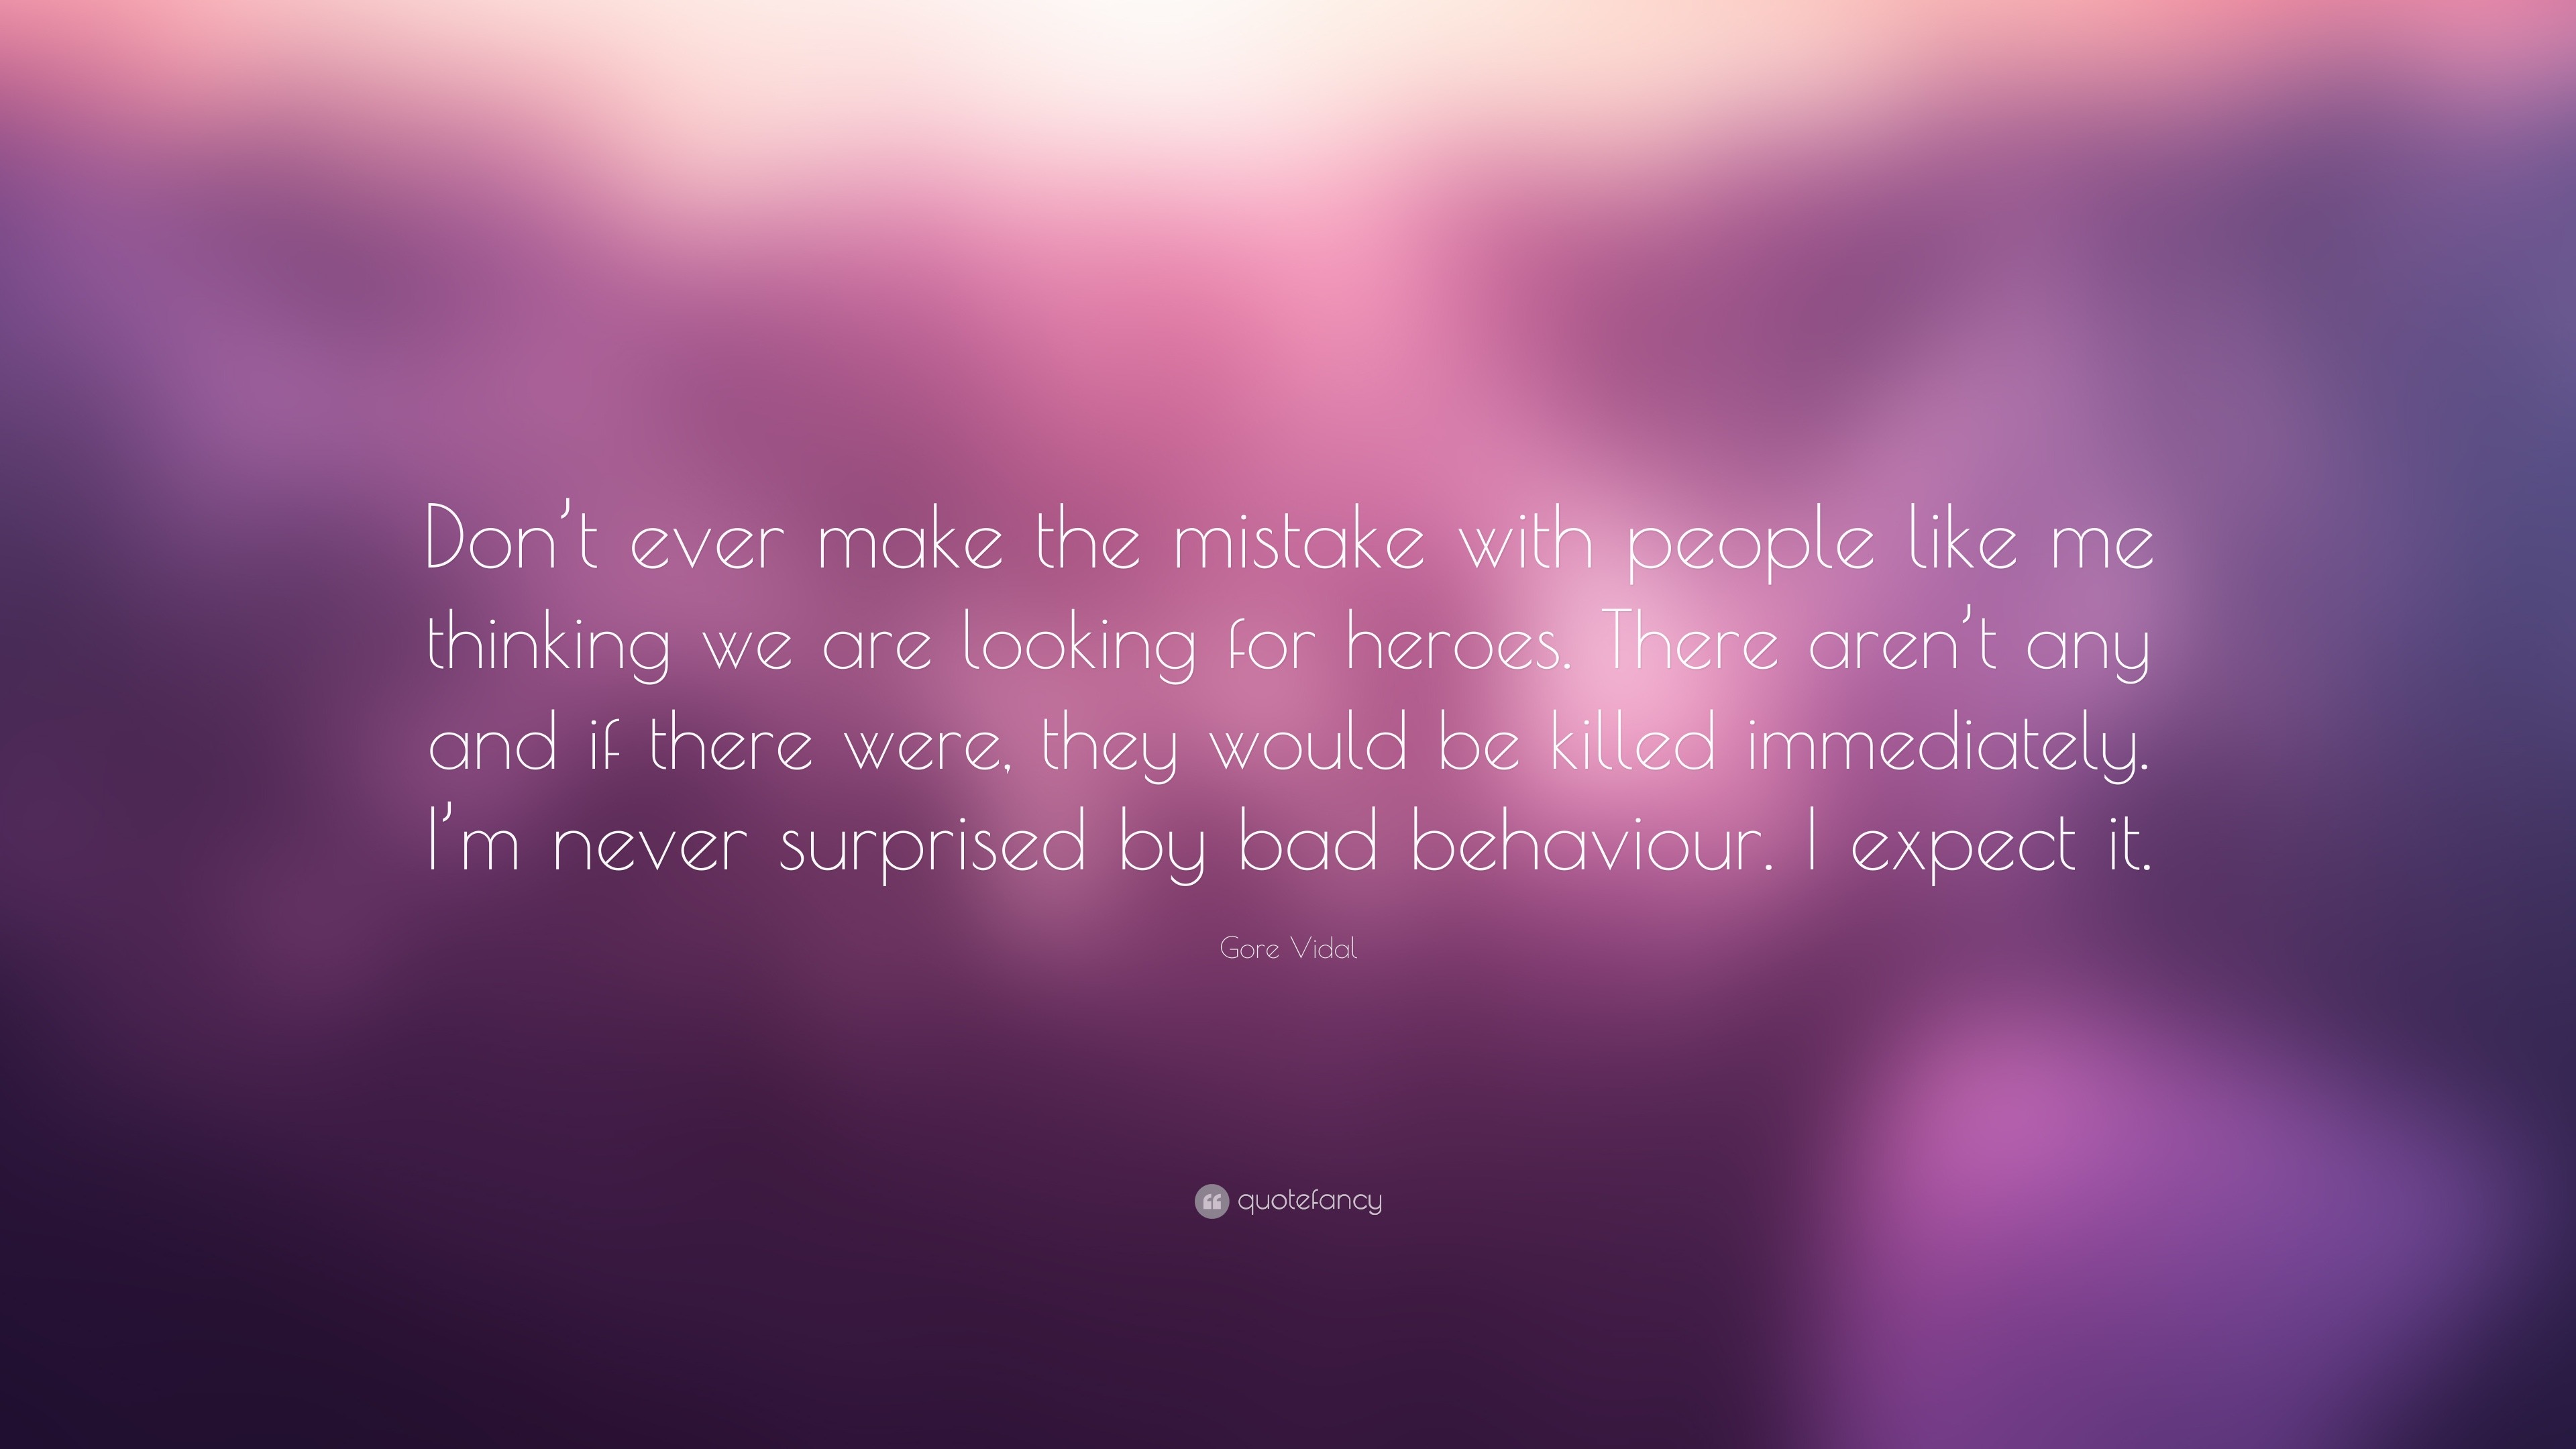 Gore Vidal Quote: “Don’t ever make the mistake with people like me ...